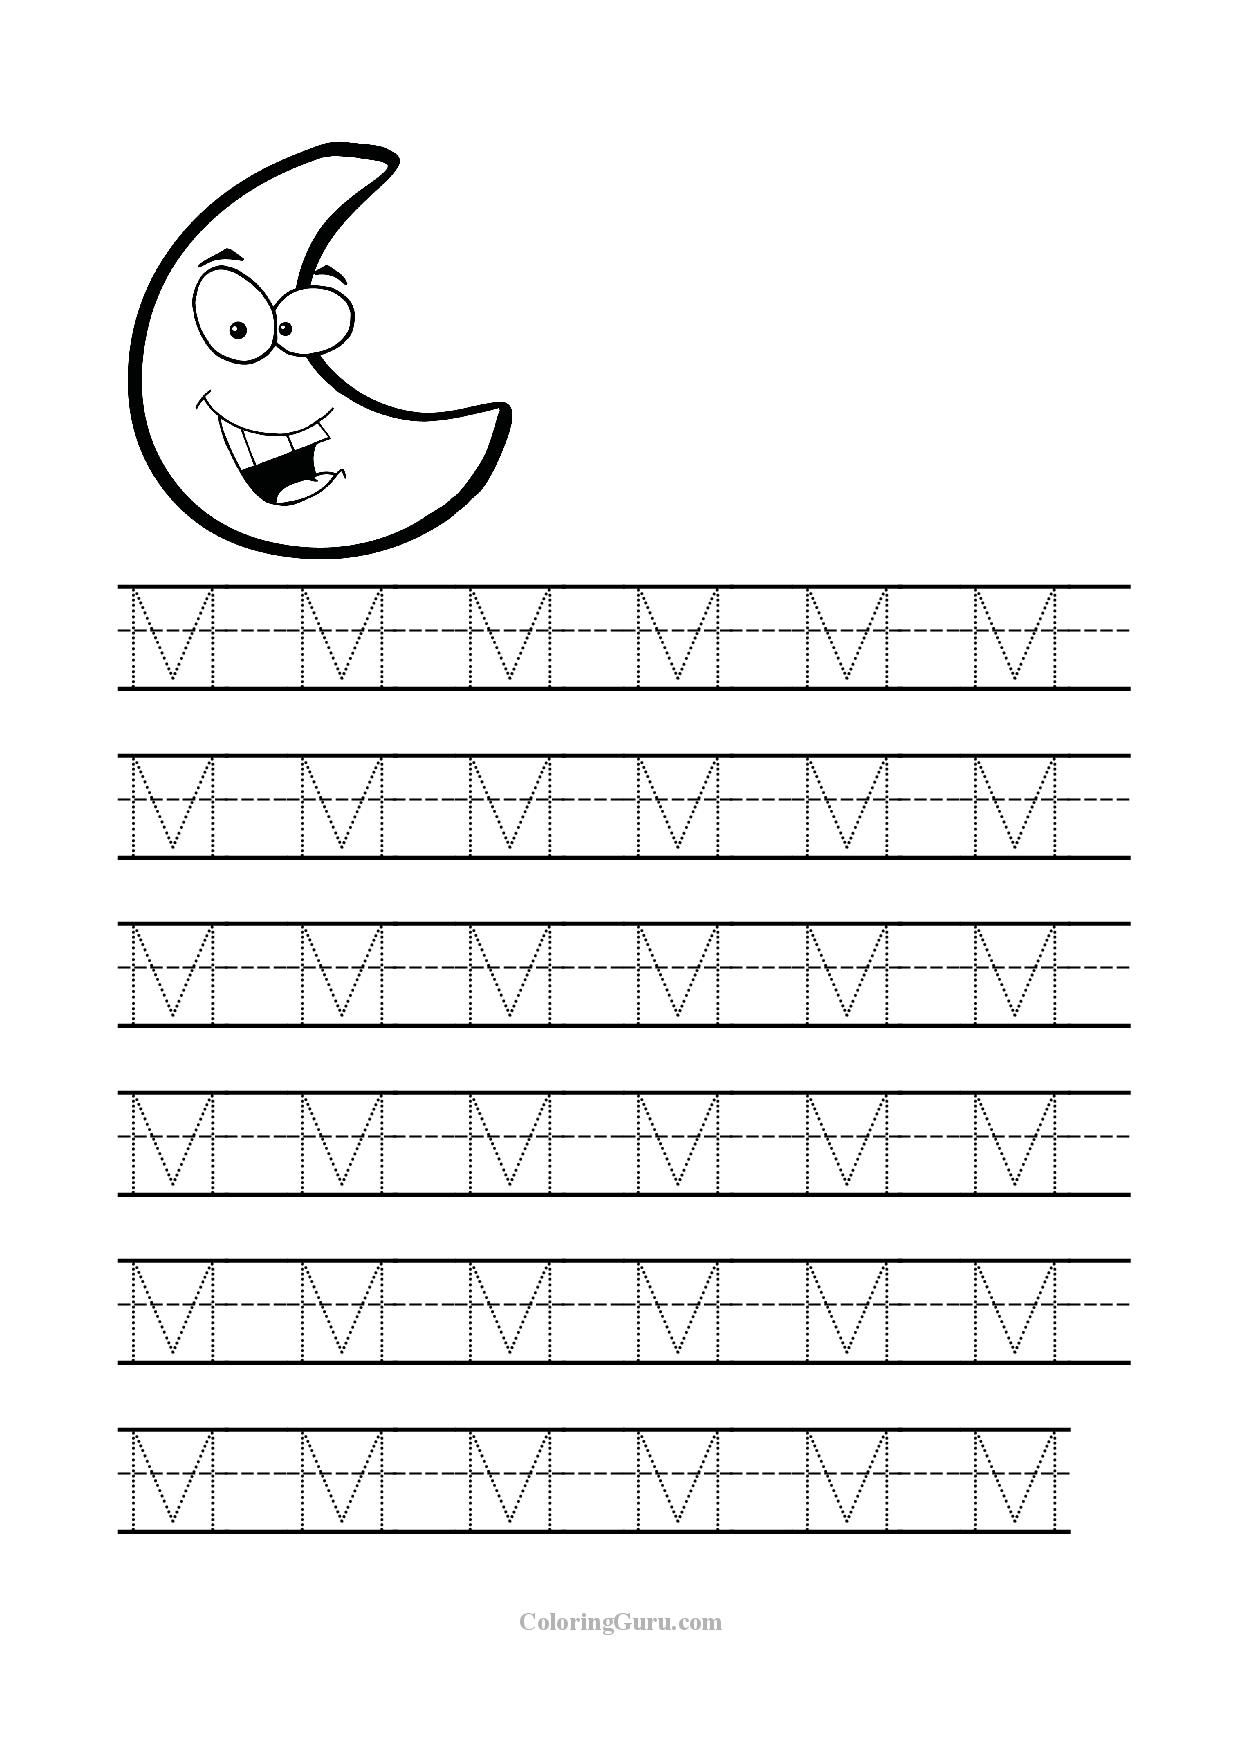 Free Printable Tracing Letter M Worksheets For Preschool intended for Letter M Worksheets Tracing